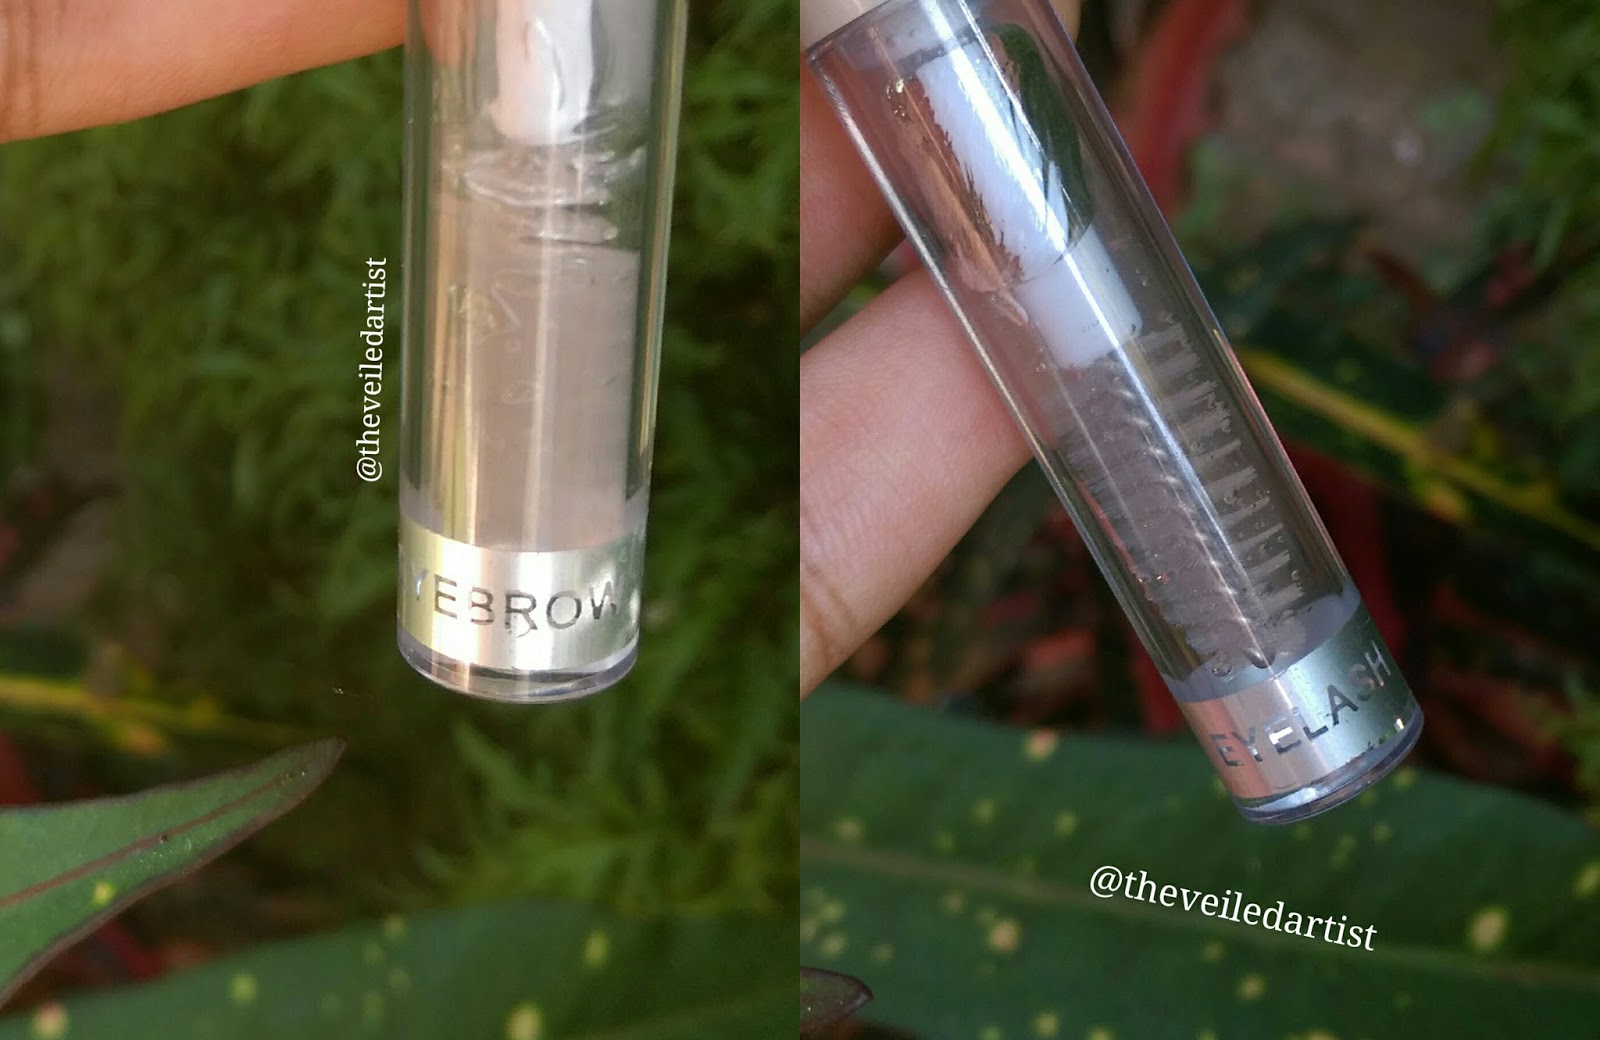 E.l.f. Clear Brow and Lash Review - The Veiled Artist